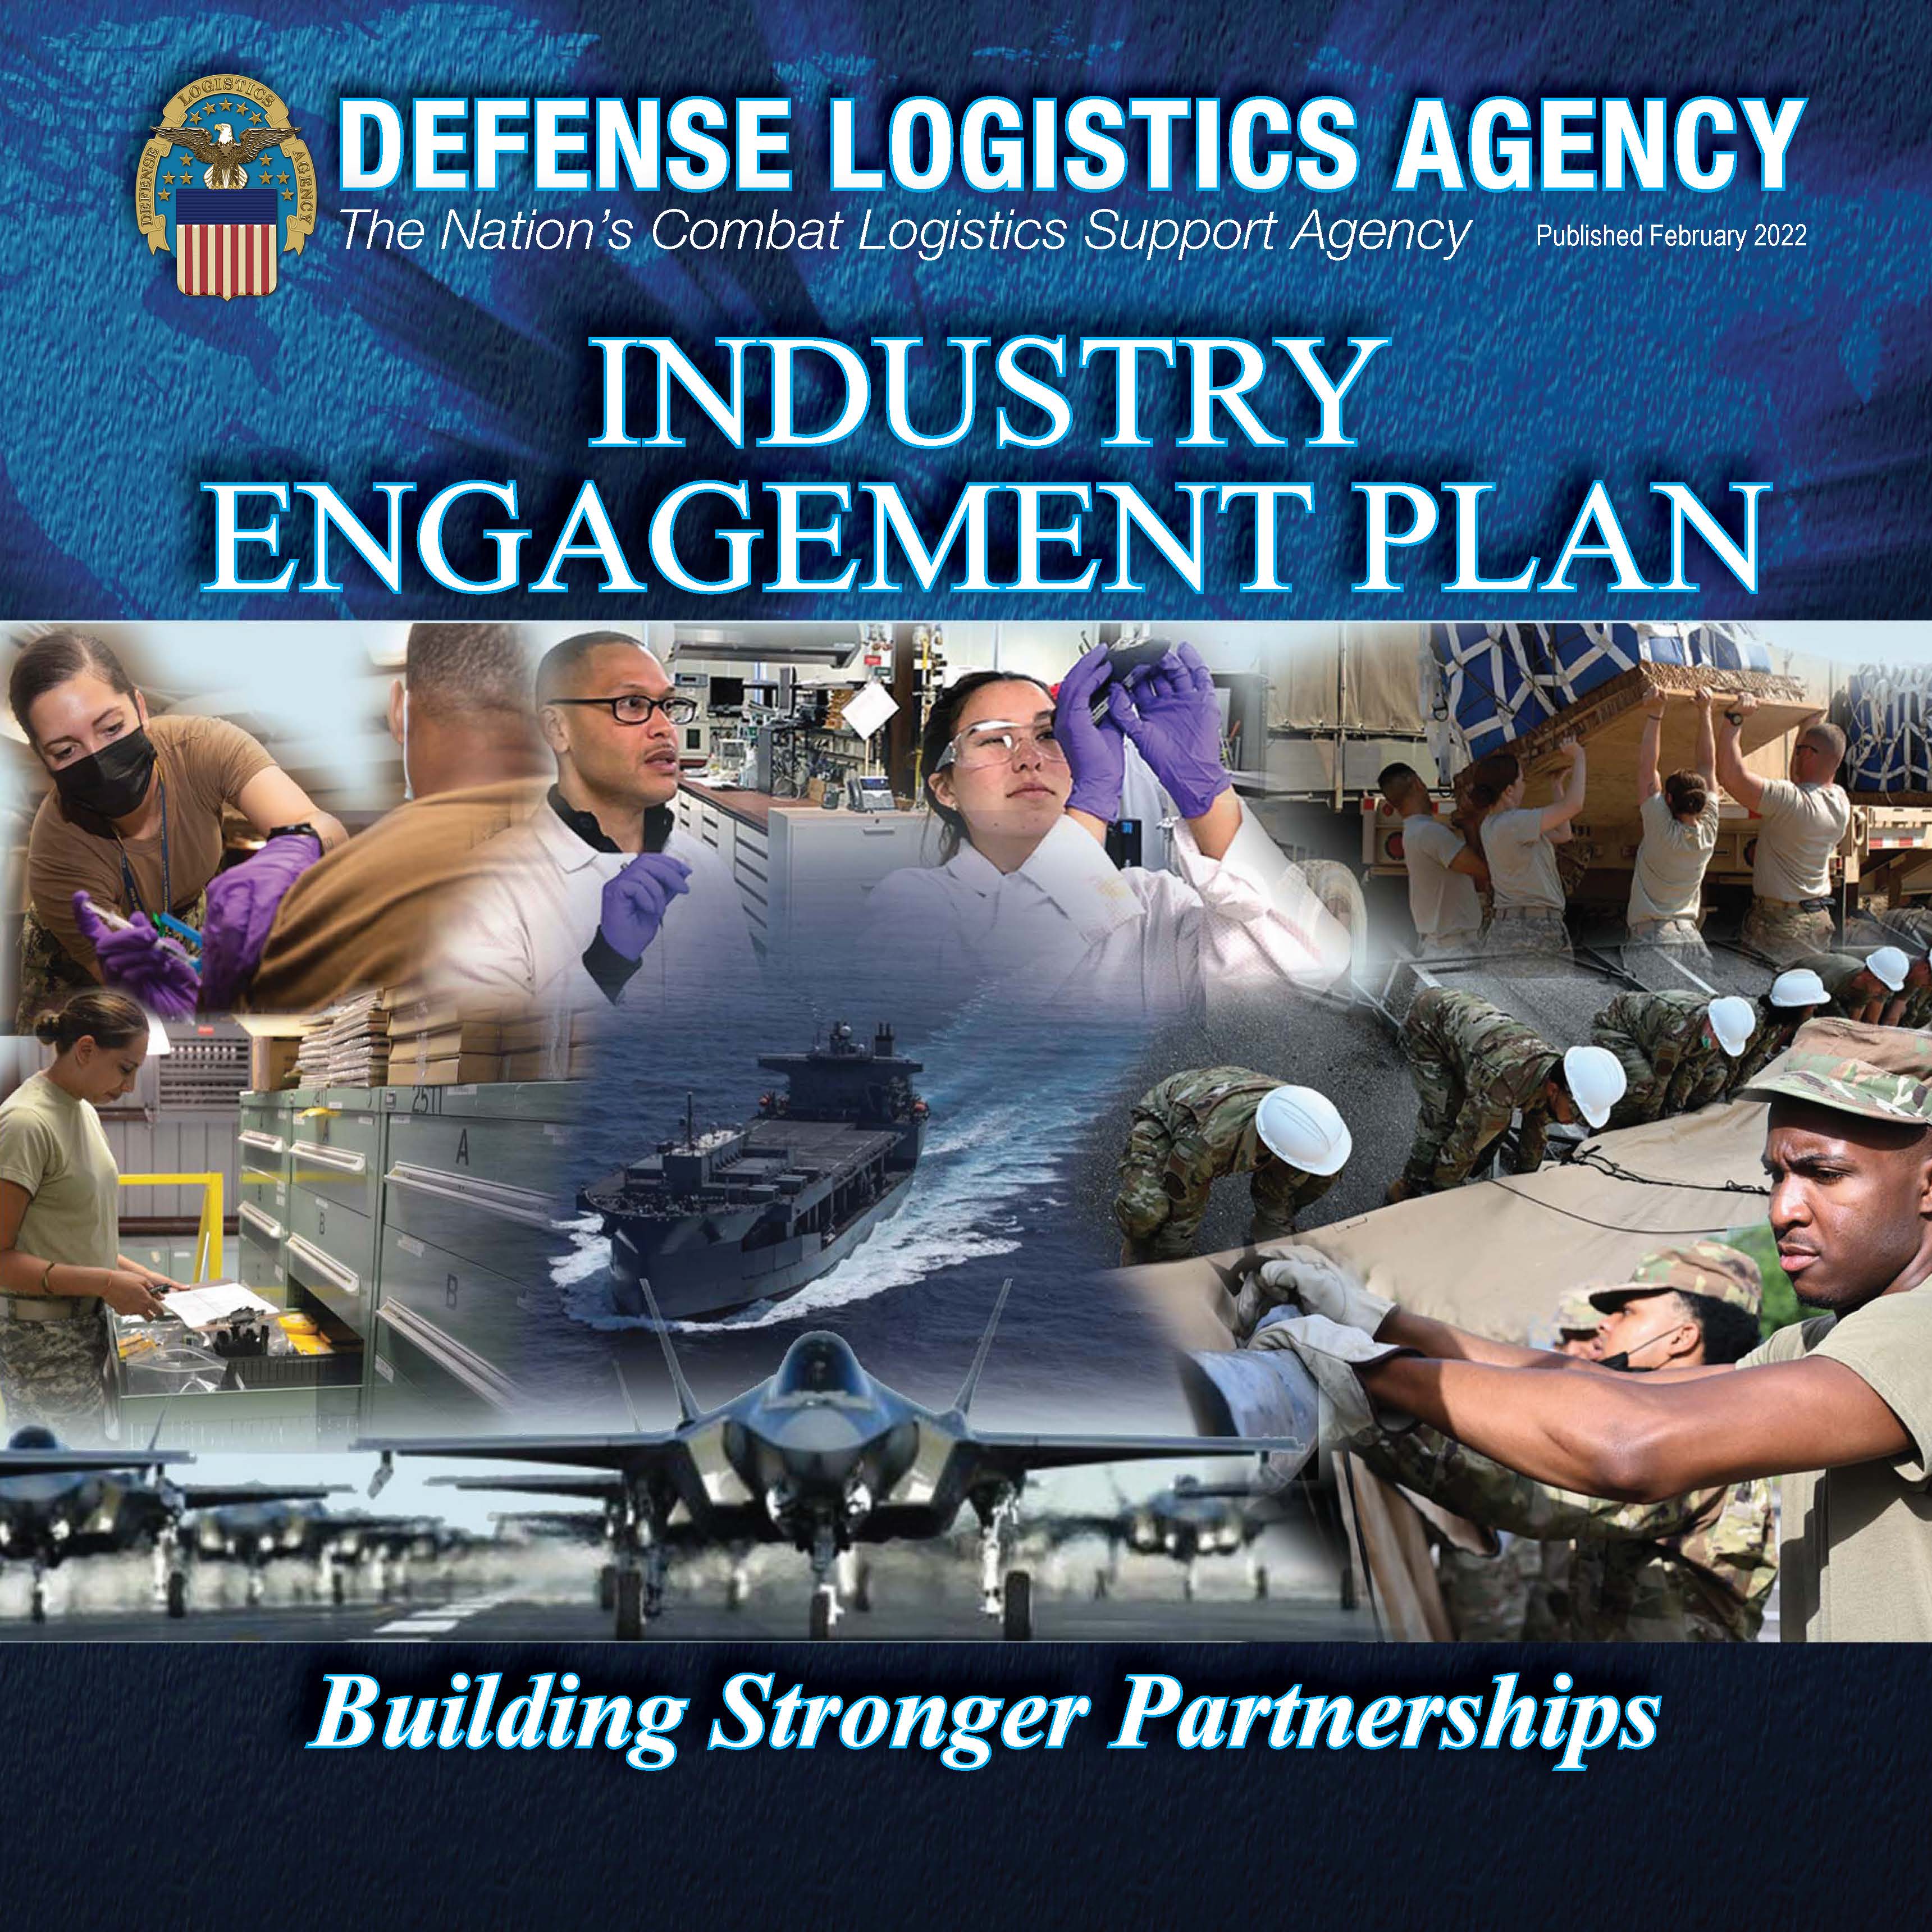 The cover image for the Industry Engagement Plan book